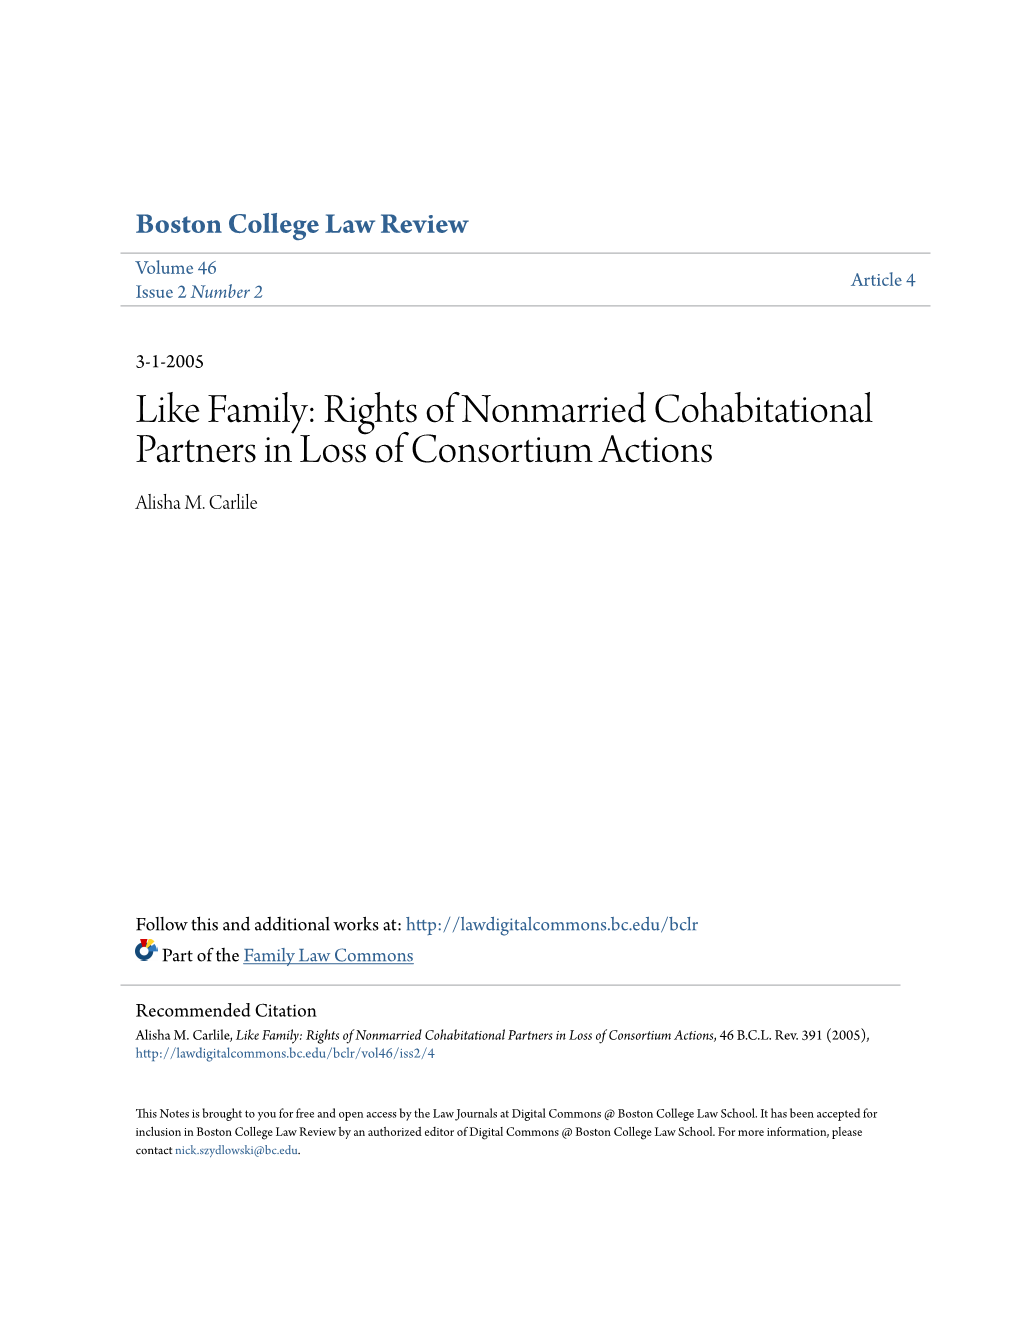 Rights of Nonmarried Cohabitational Partners in Loss of Consortium Actions Alisha M